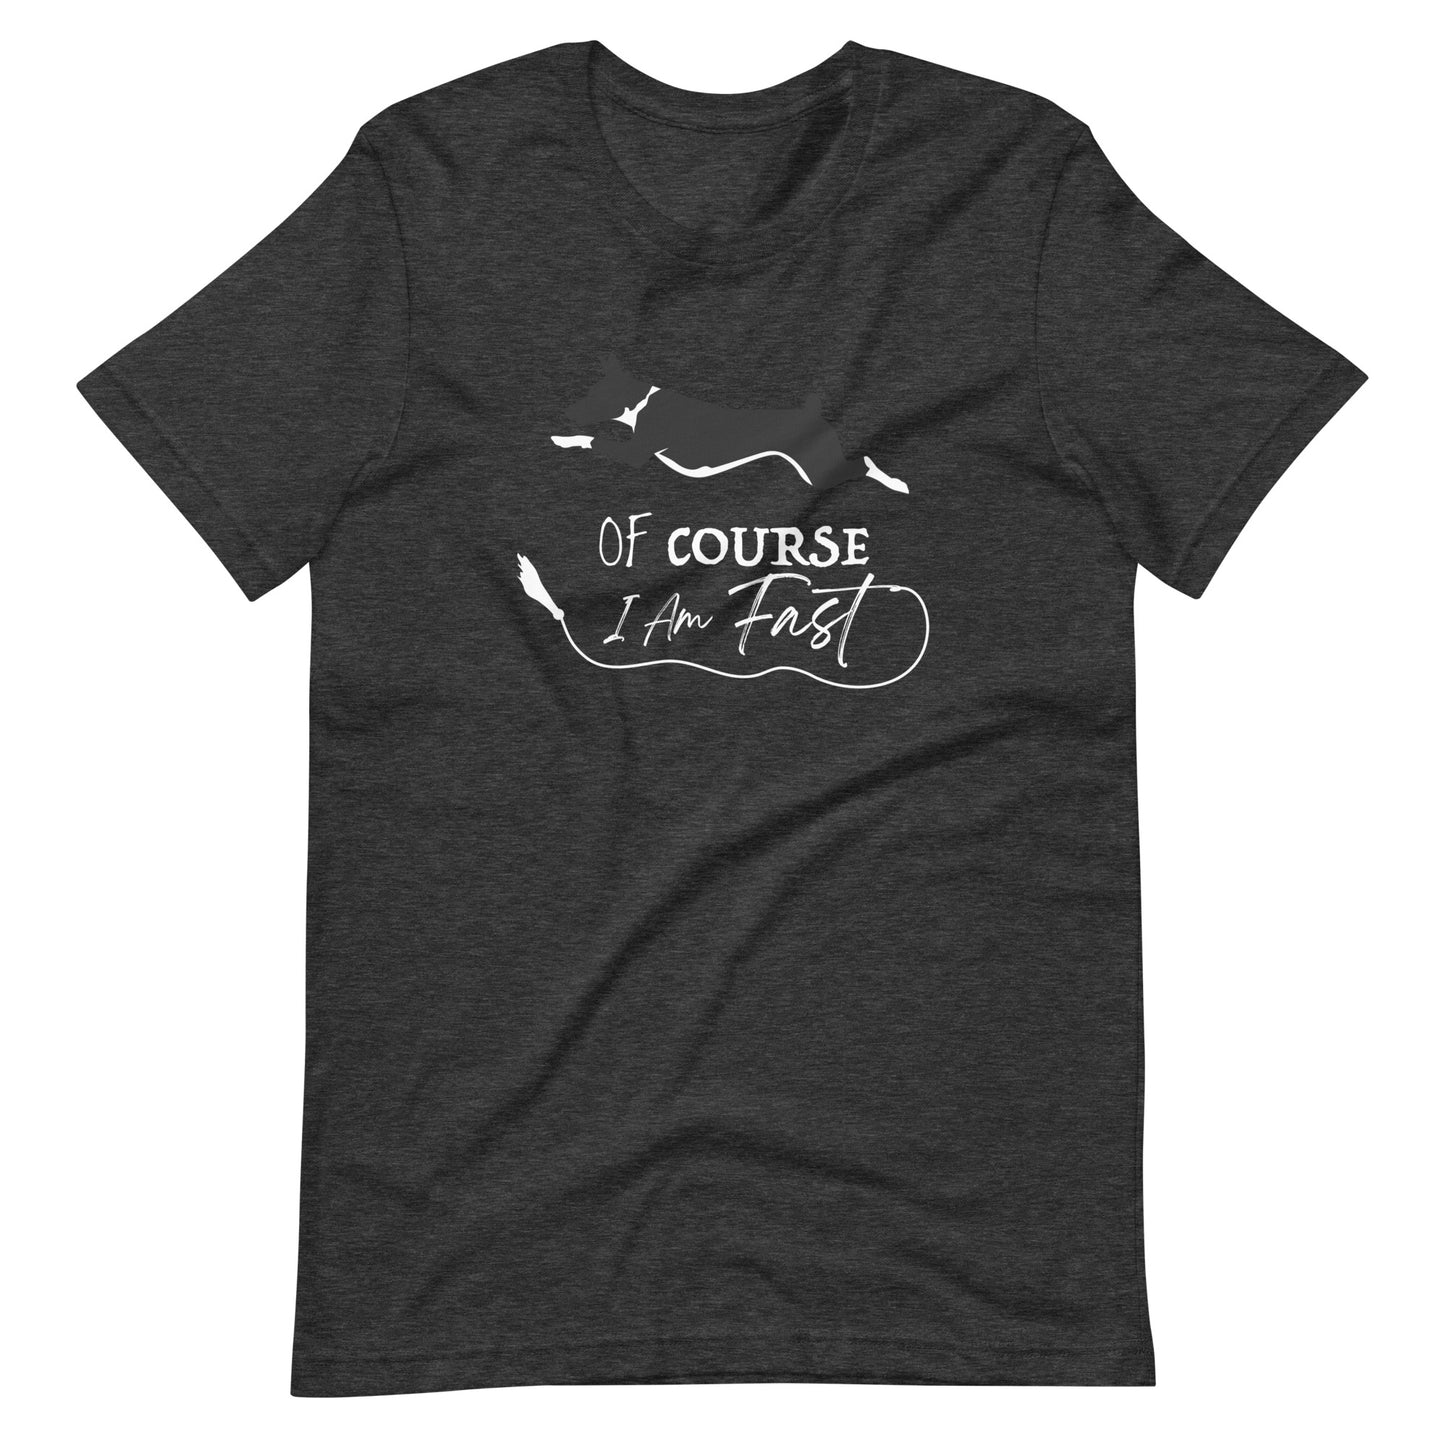 OF COURSE FAST MCNAB Unisex t-shirt